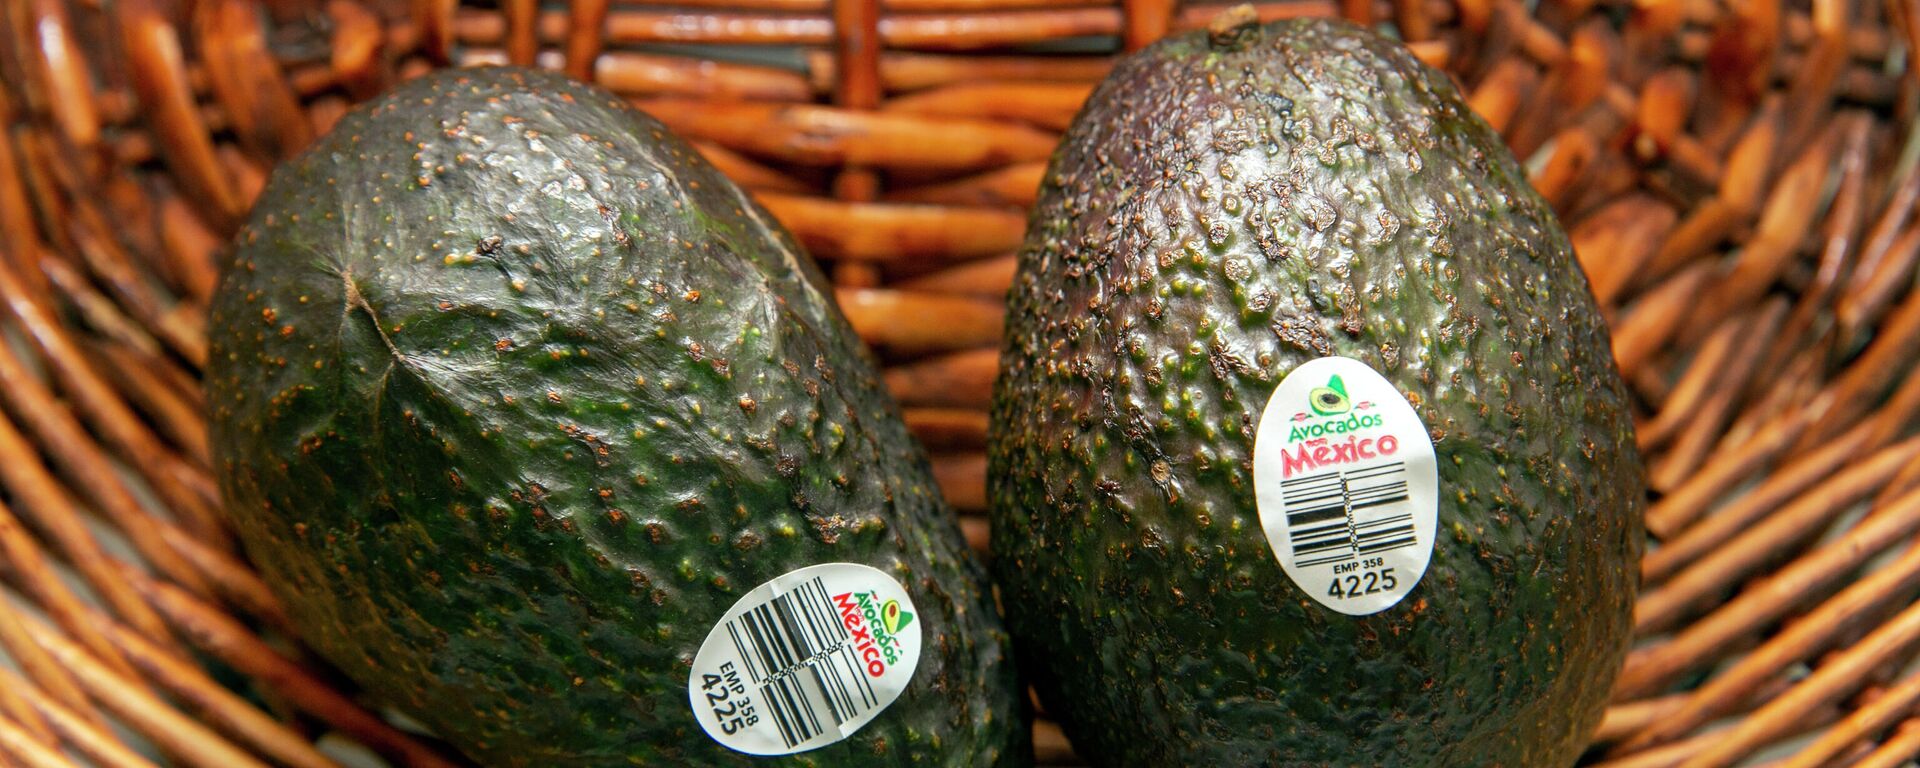 Avocados from Mexico sit in a basket in Rutherford, New Jersey, on Thursday, February 17, 2022. - Sputnik International, 1920, 25.02.2022